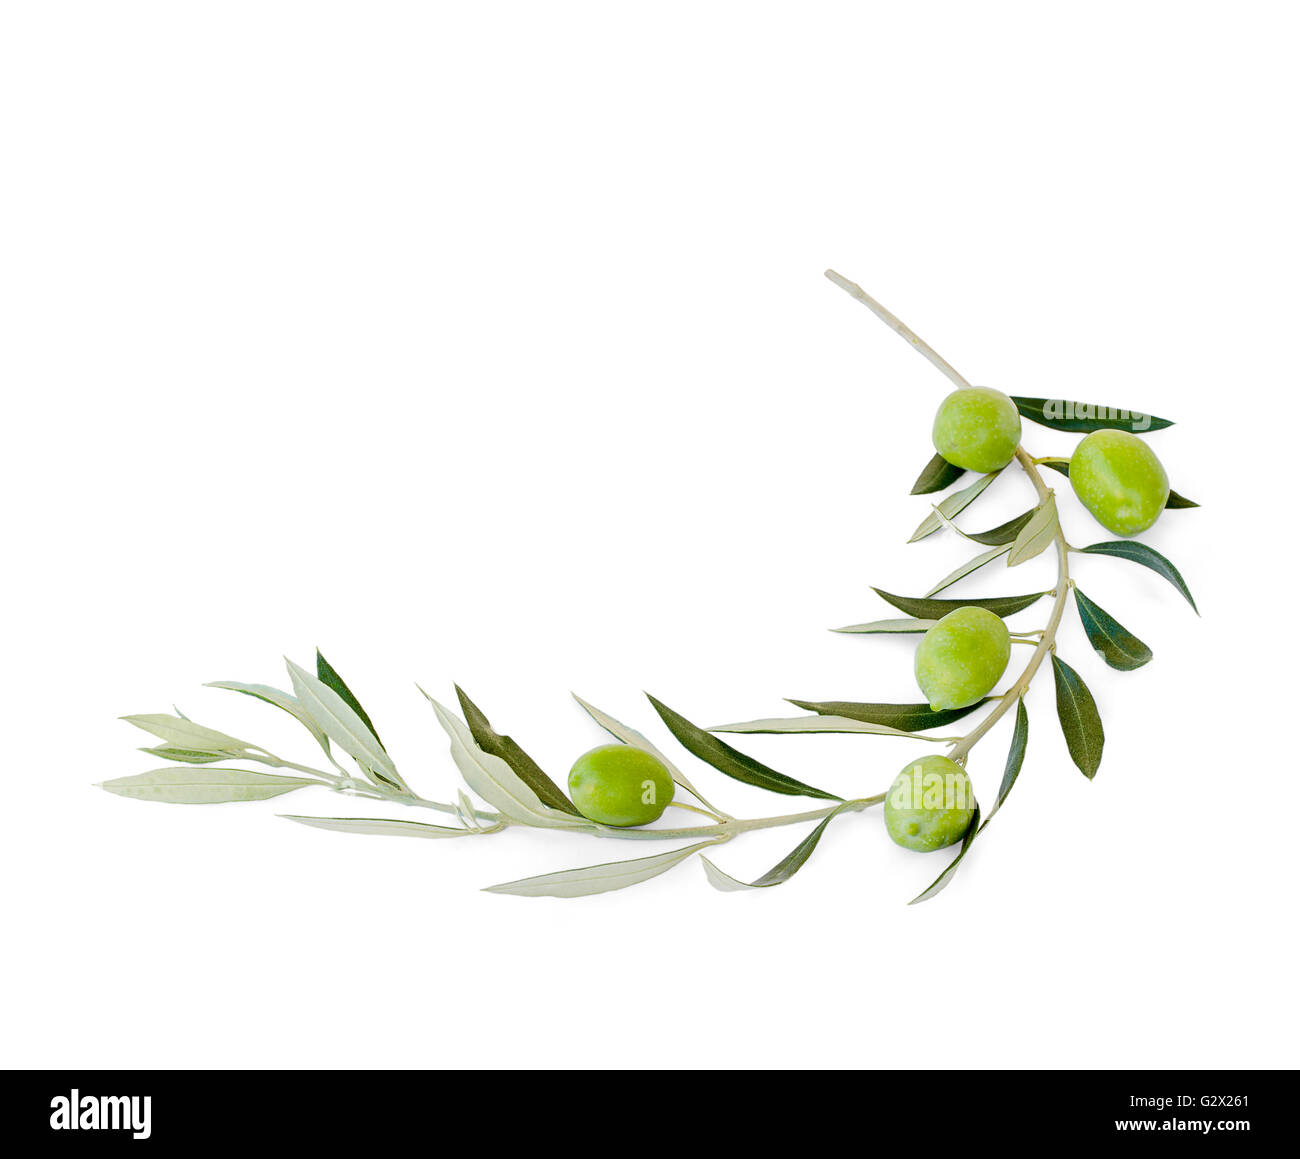 Five green ripe olives on branch, isolated Stock Photo